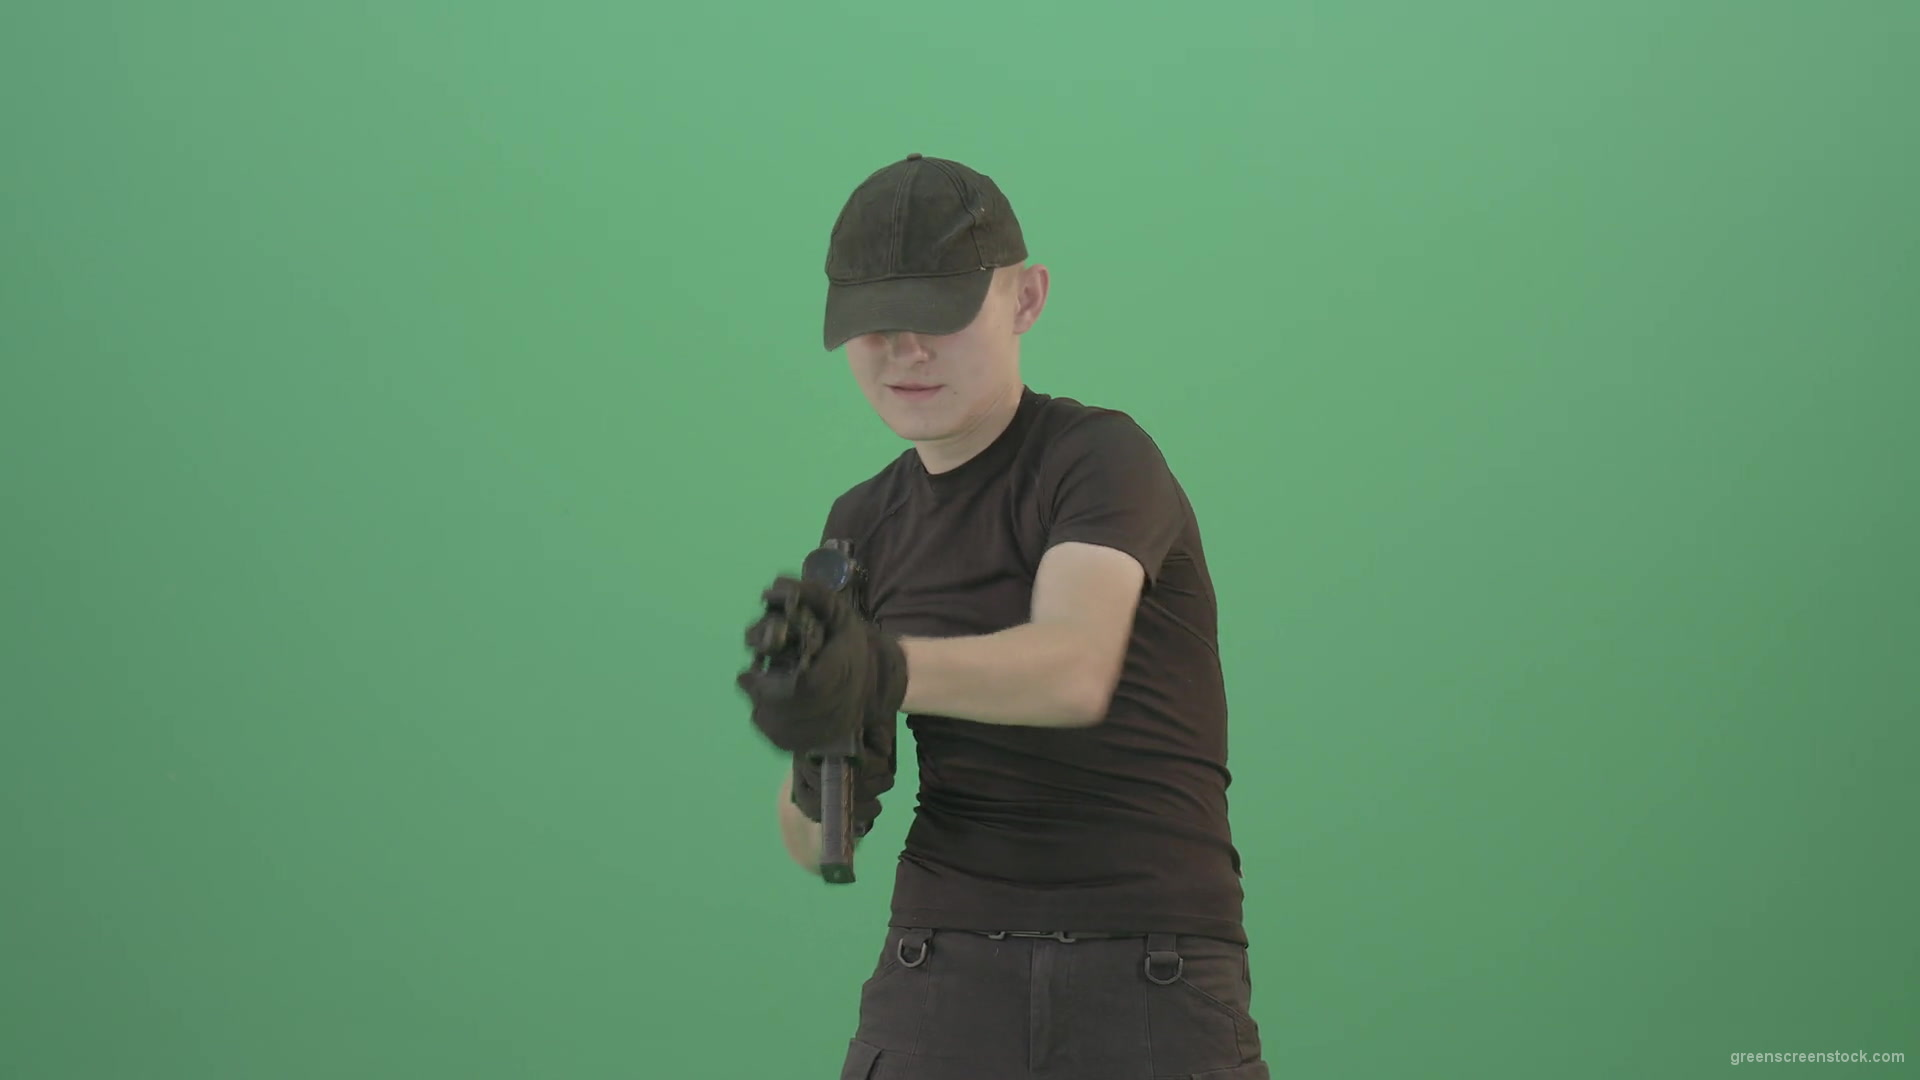 Funny-Small-boy-terrorist-shooting-enemies-from-machine-gun-isolated-on-green-screen-4K-Video-Footage-1920_005 Green Screen Stock